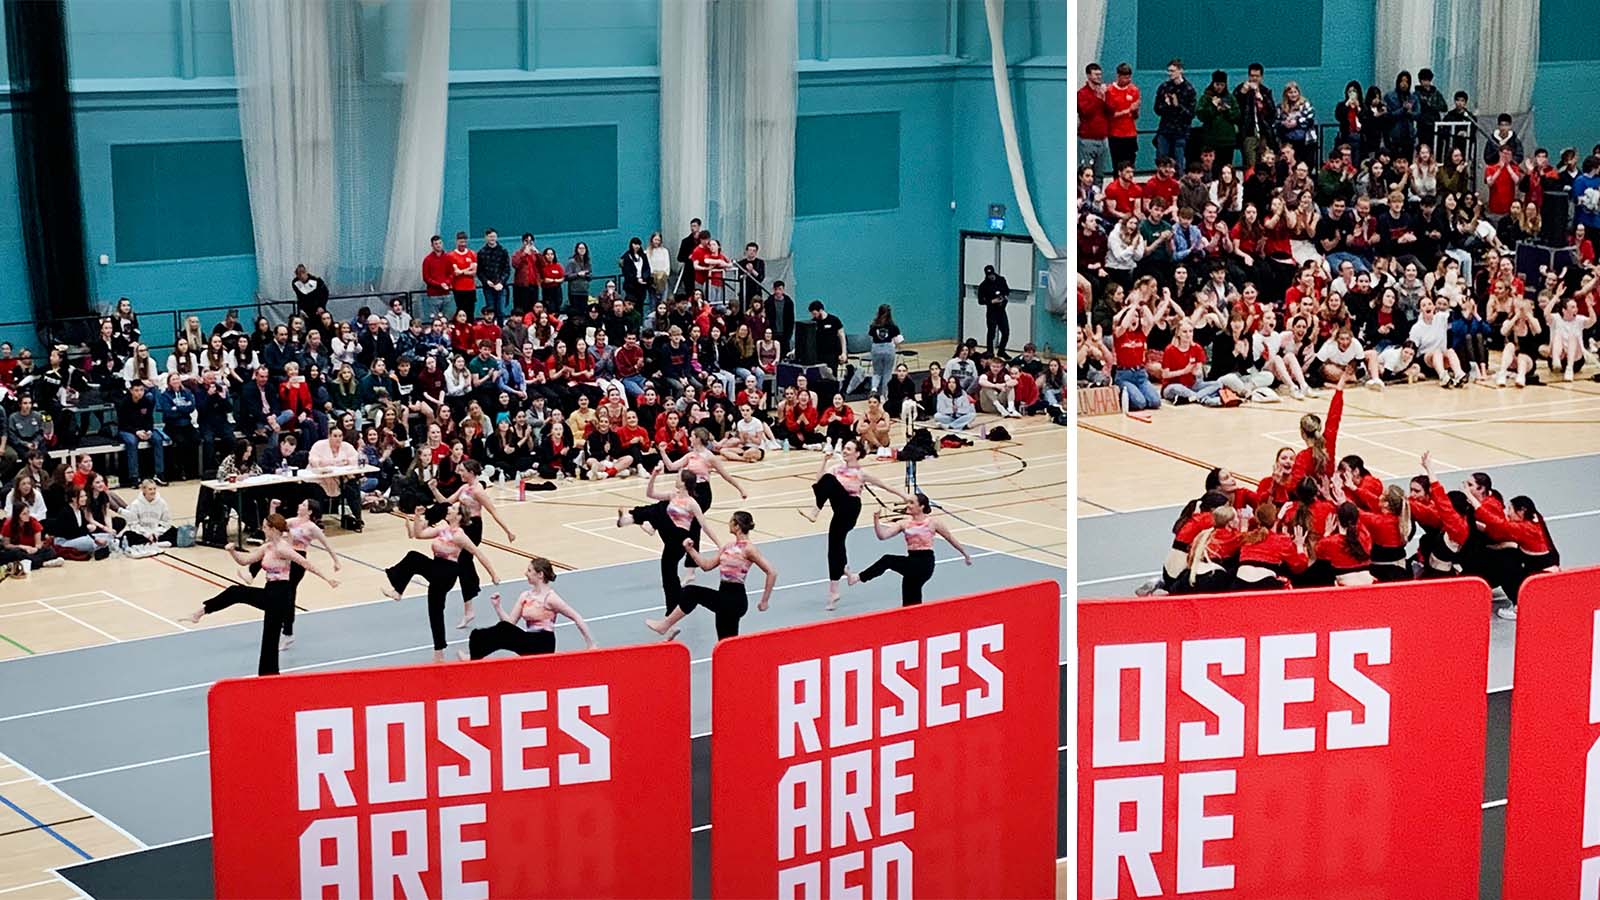 Two photos of the dancing teams in the competition